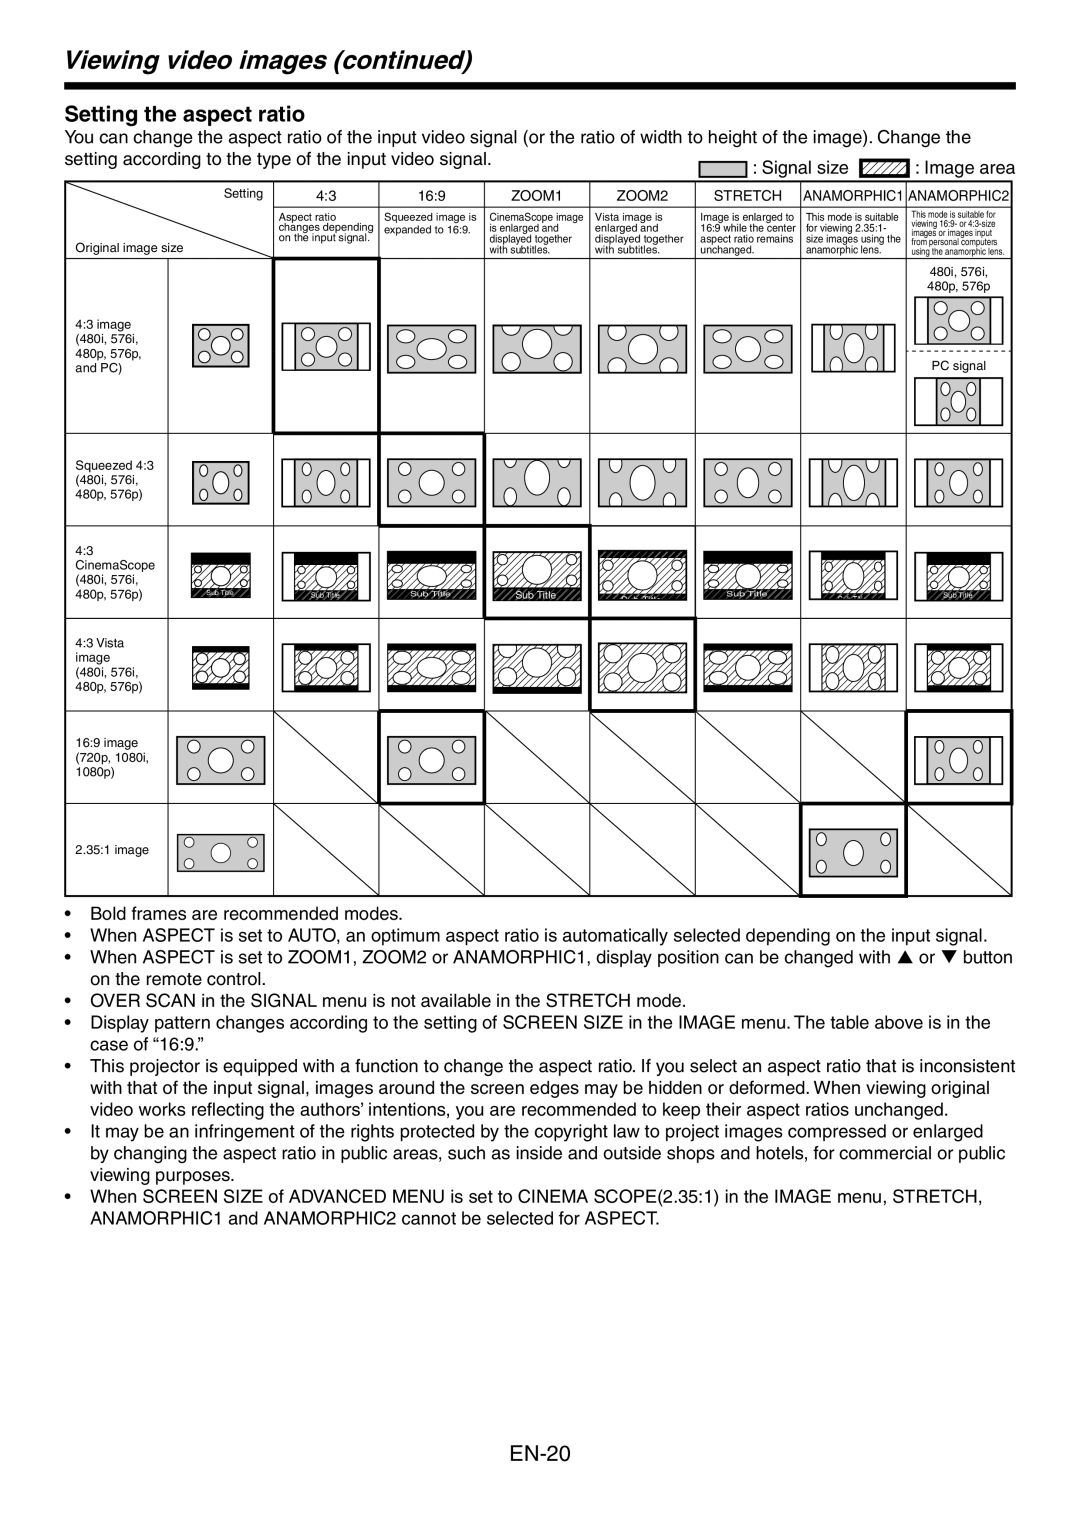 Mitsubishi Electronics HC3800 user manual Setting the aspect ratio, Viewing video images continued, EN-20 